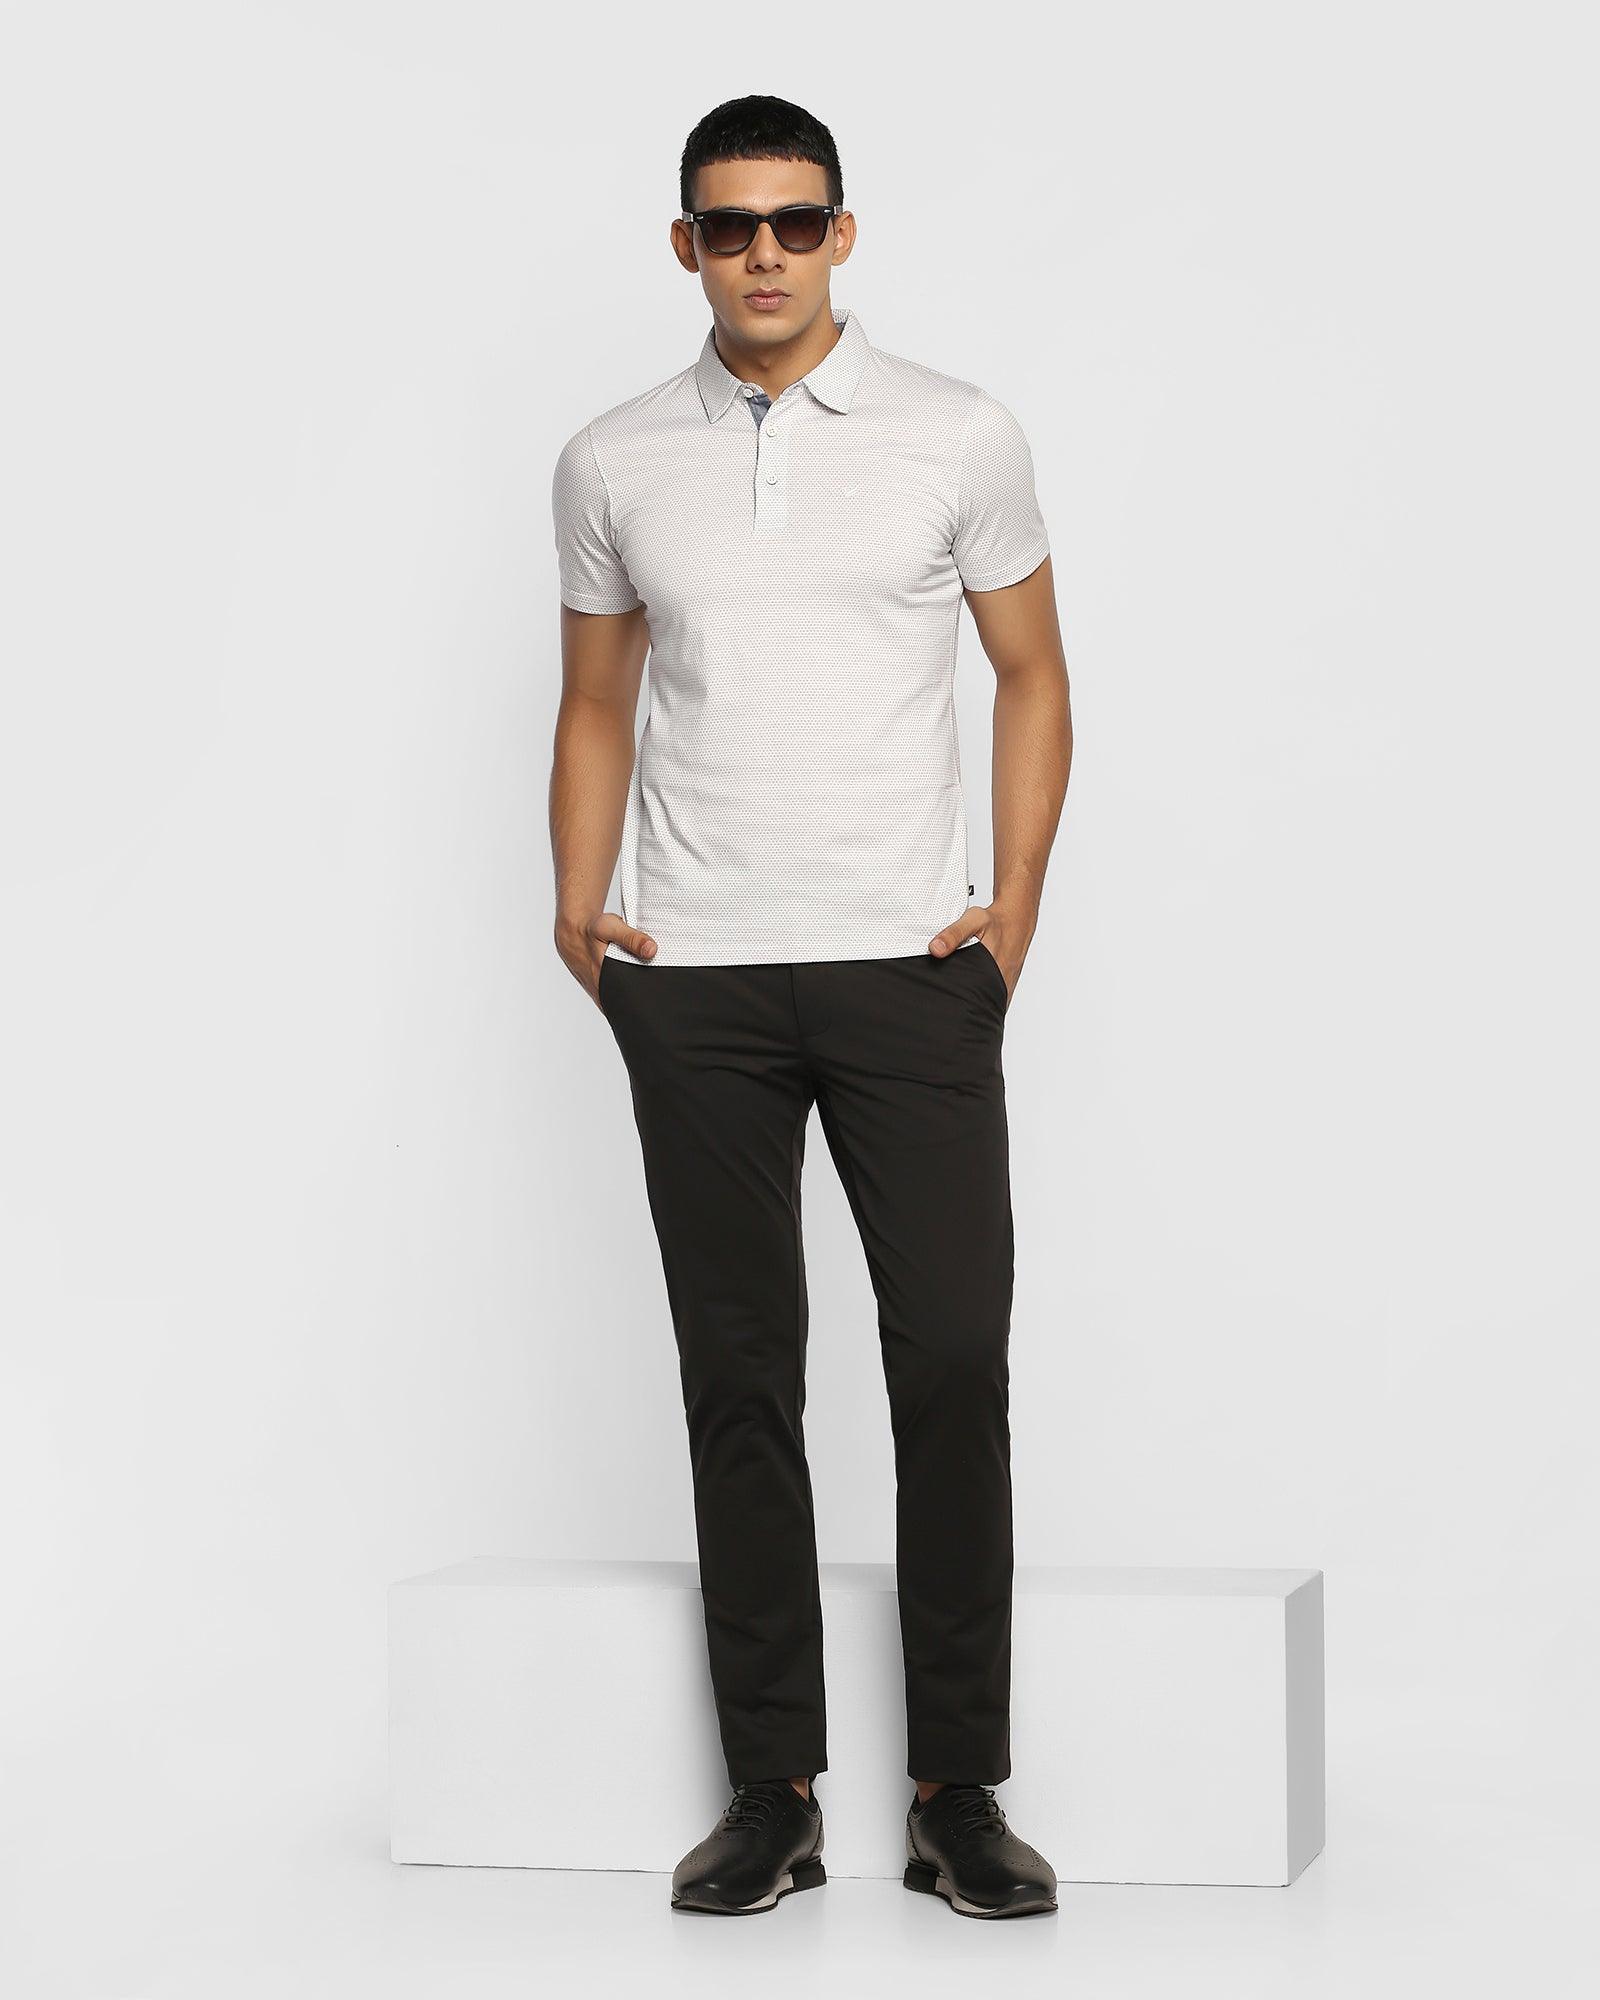 Slim Fit B-91 Casual Black Solid Khakis - Hector